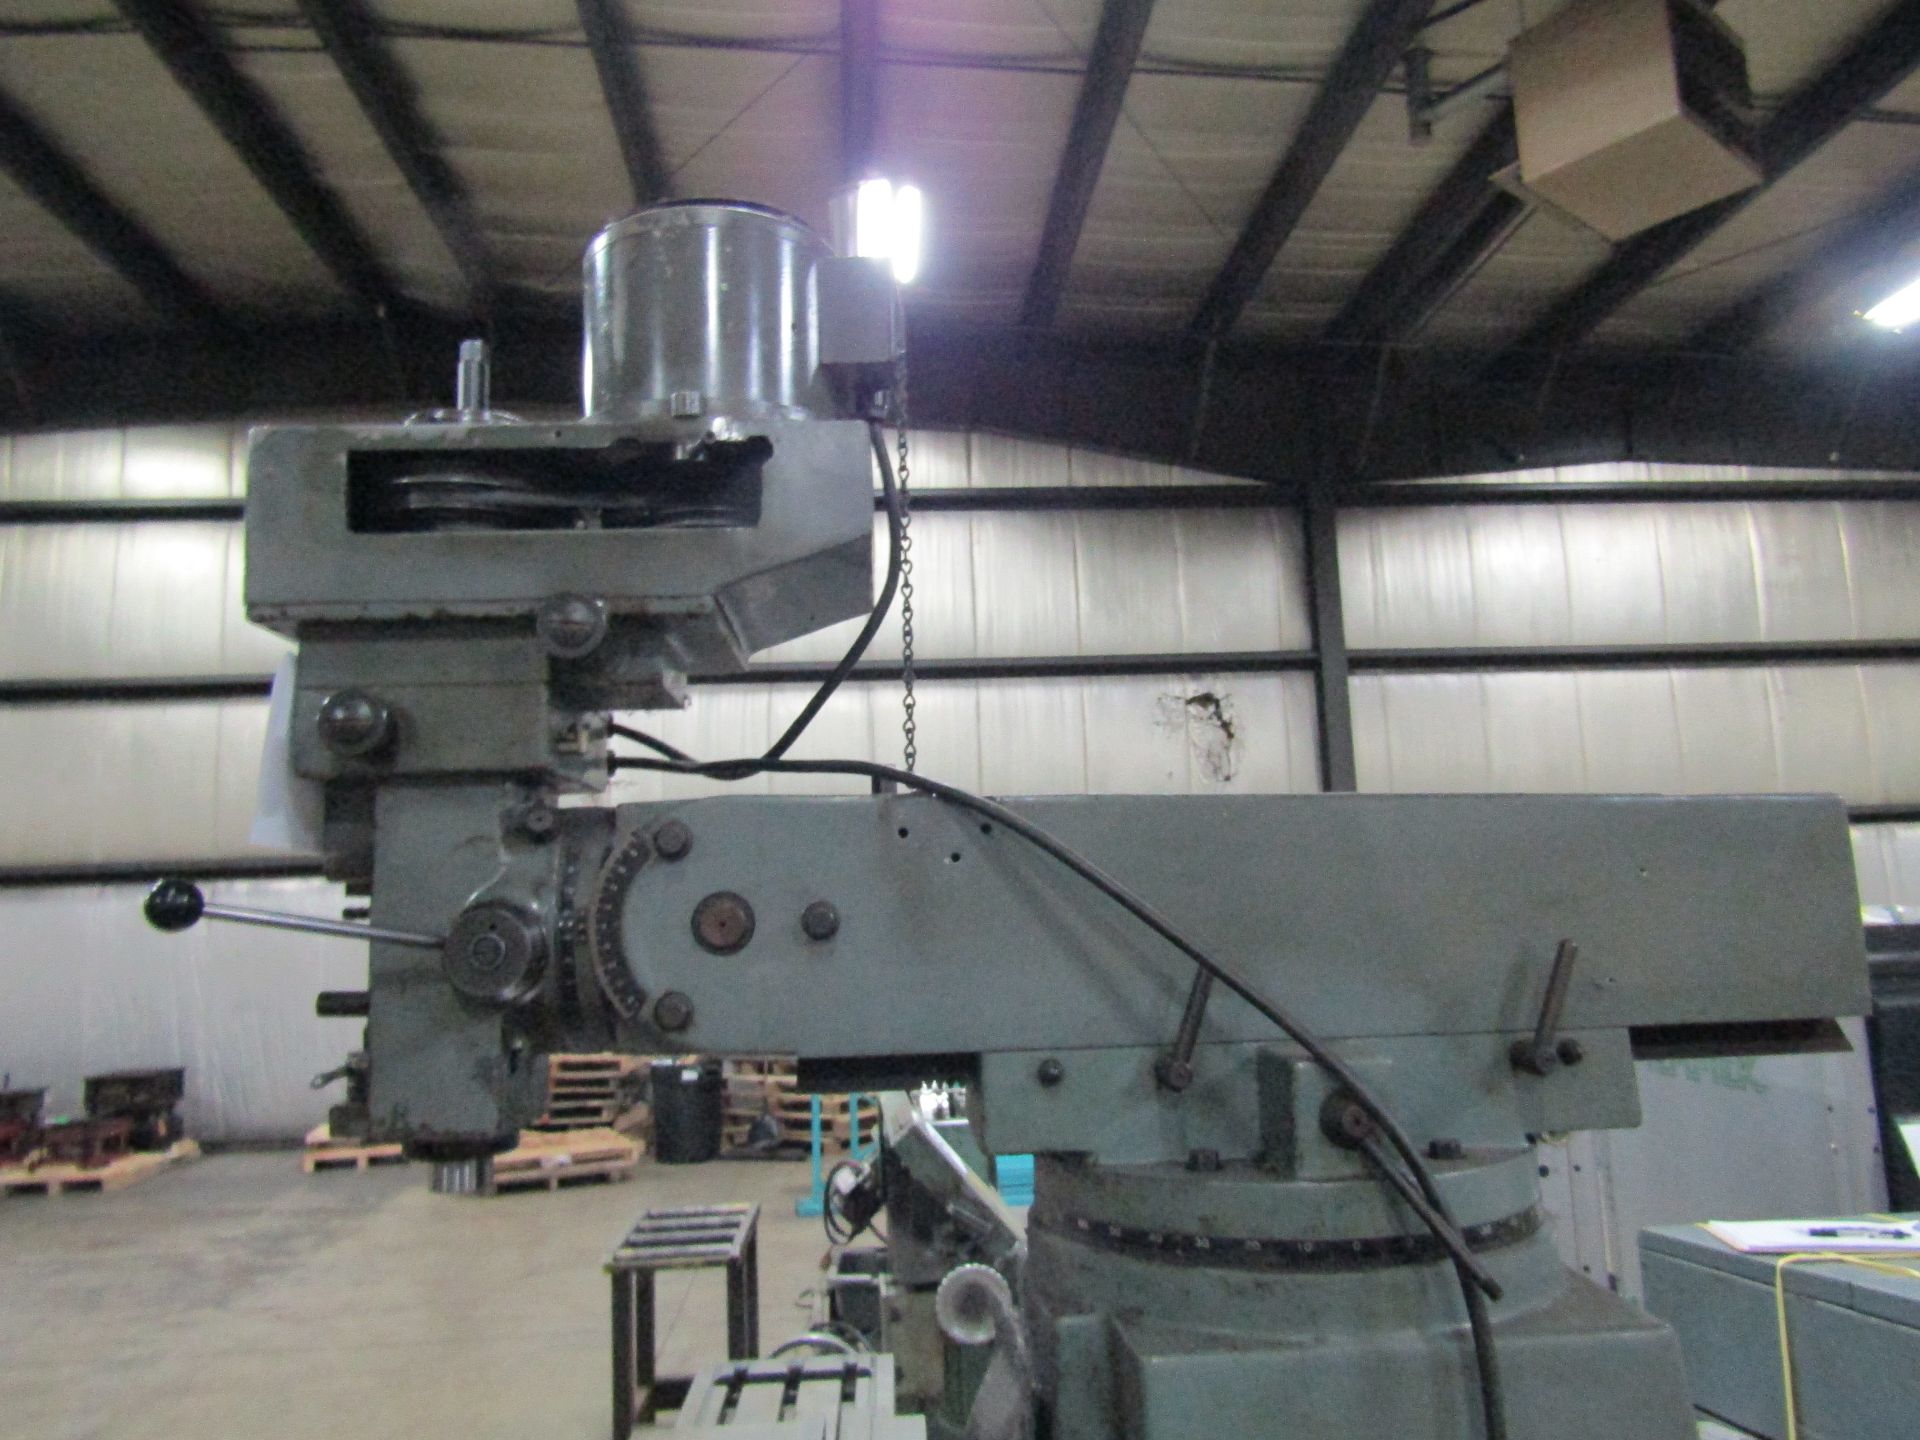 Supermax Vertical Mill M#: YCM-16VA S#: 1175 49 X 9 Power Table W/ Vise - Image 4 of 5